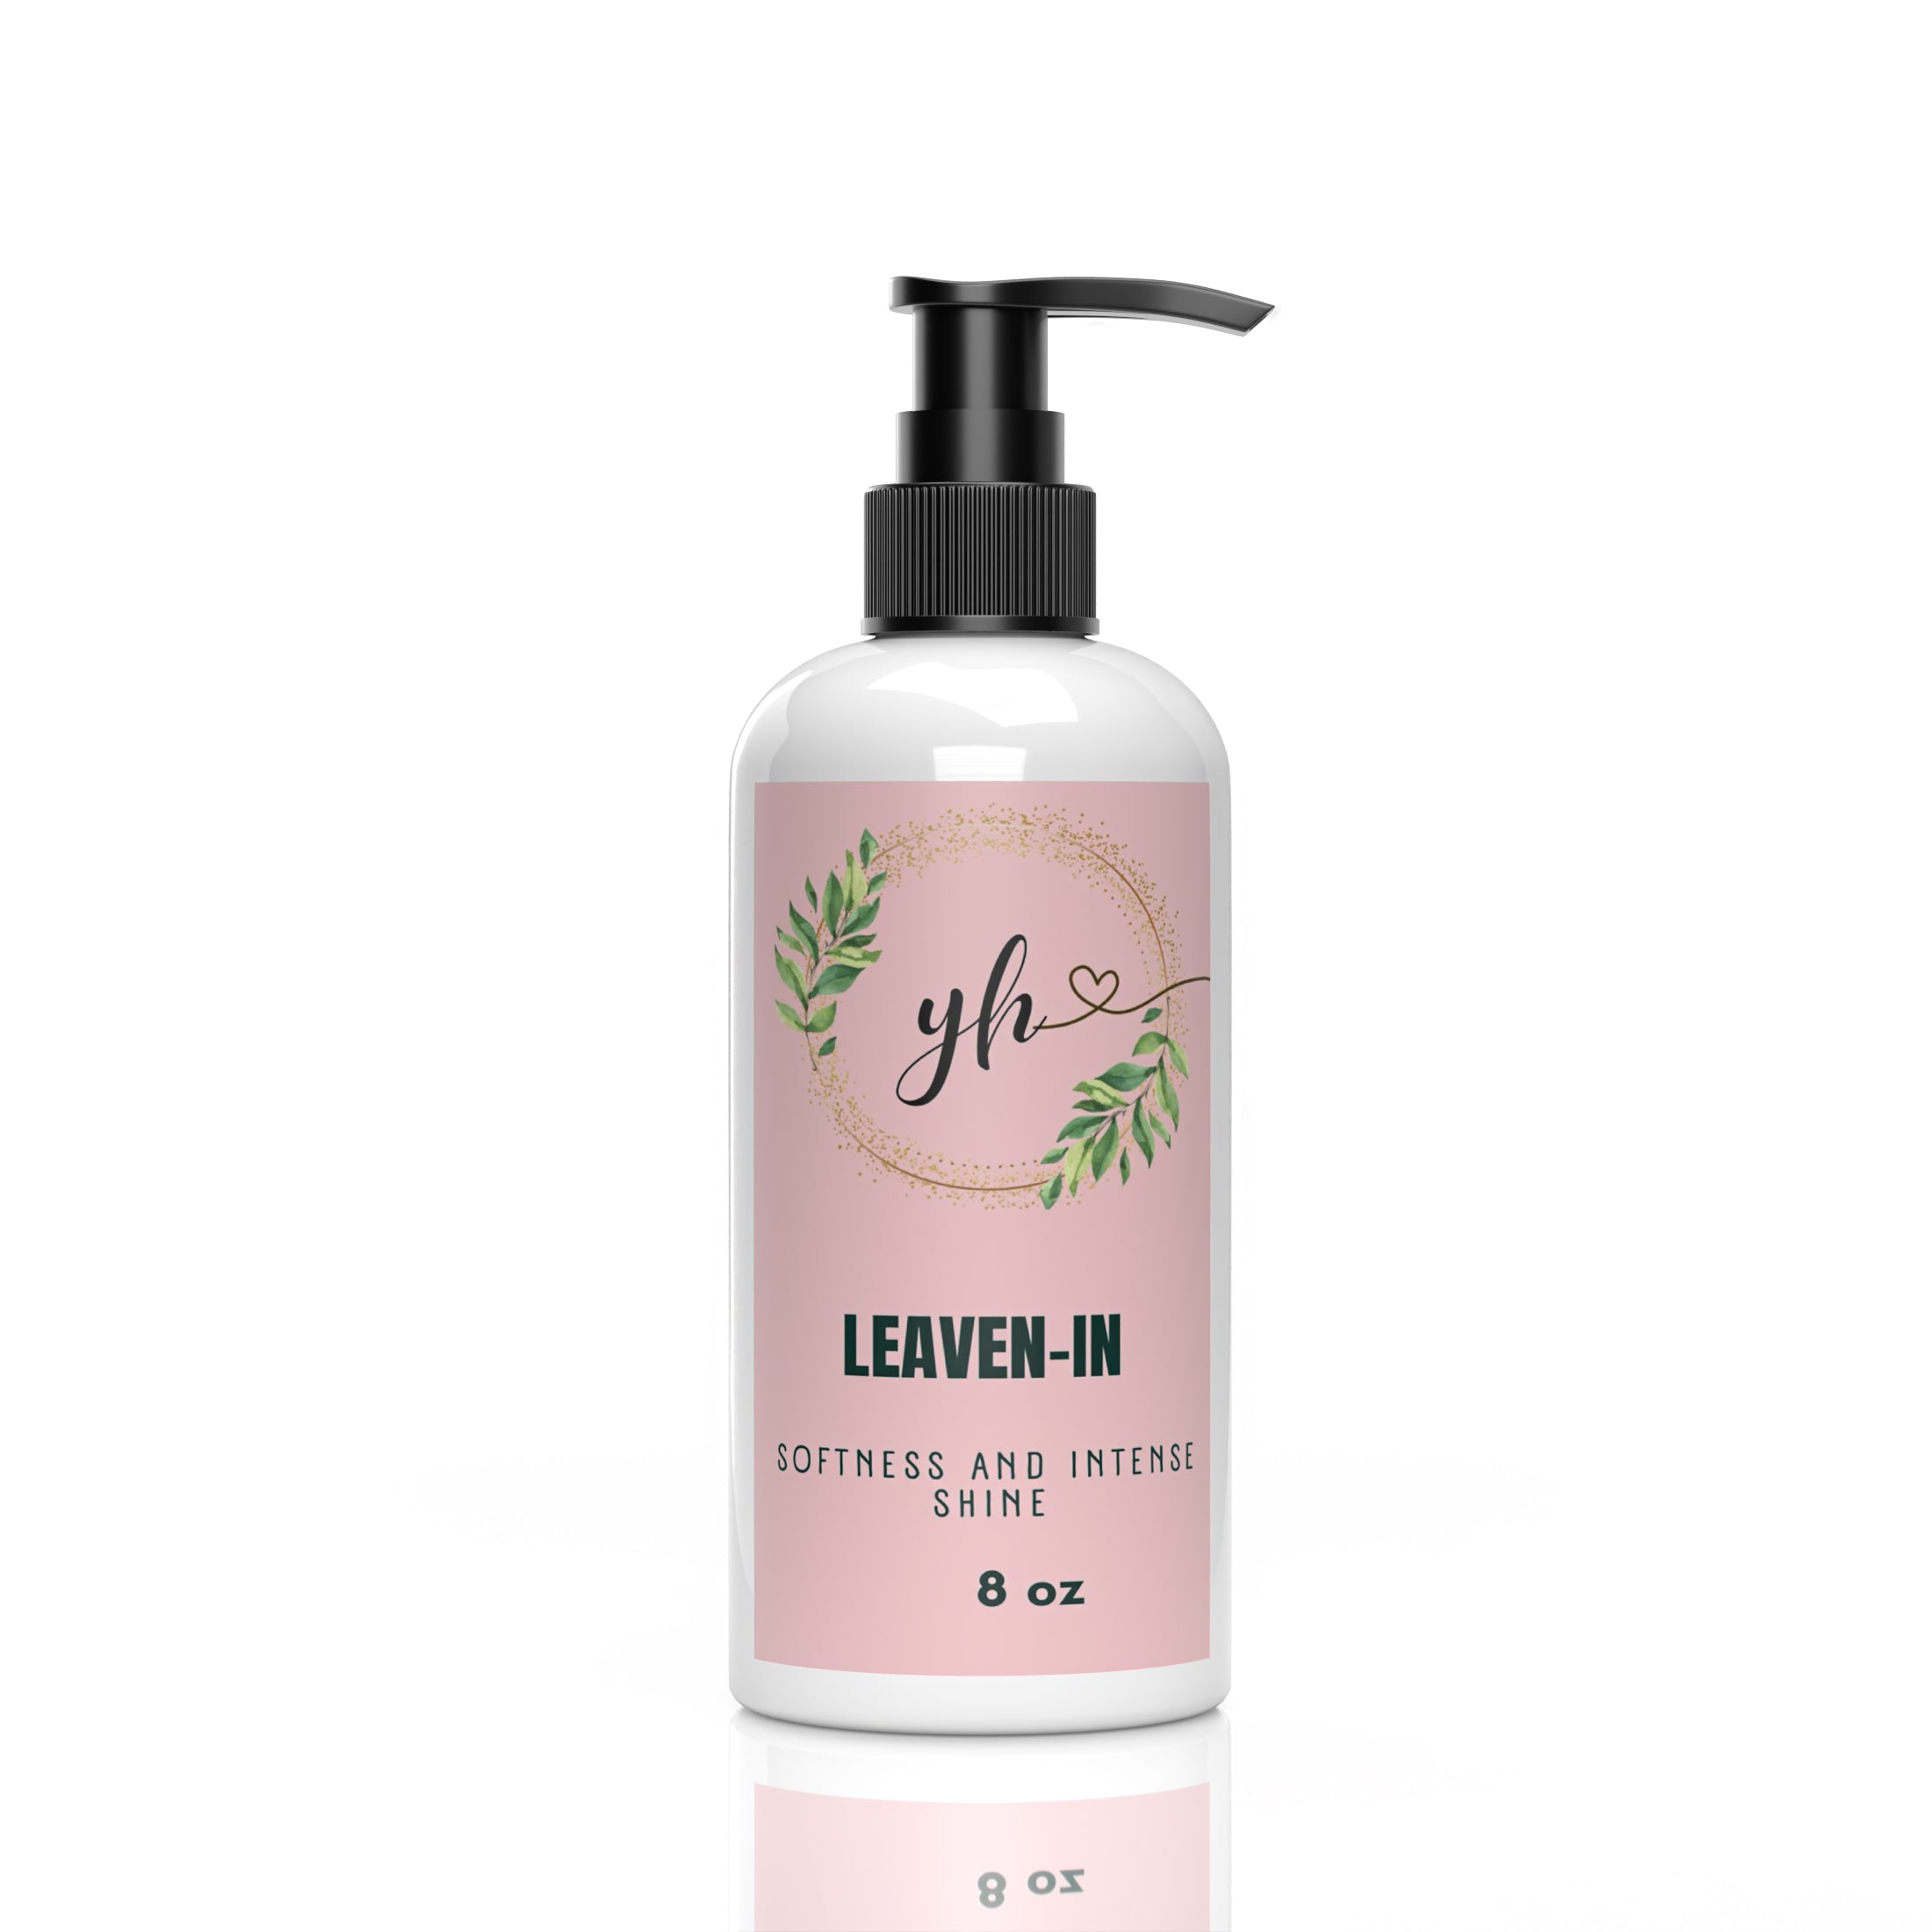 Leave - In softness and shine